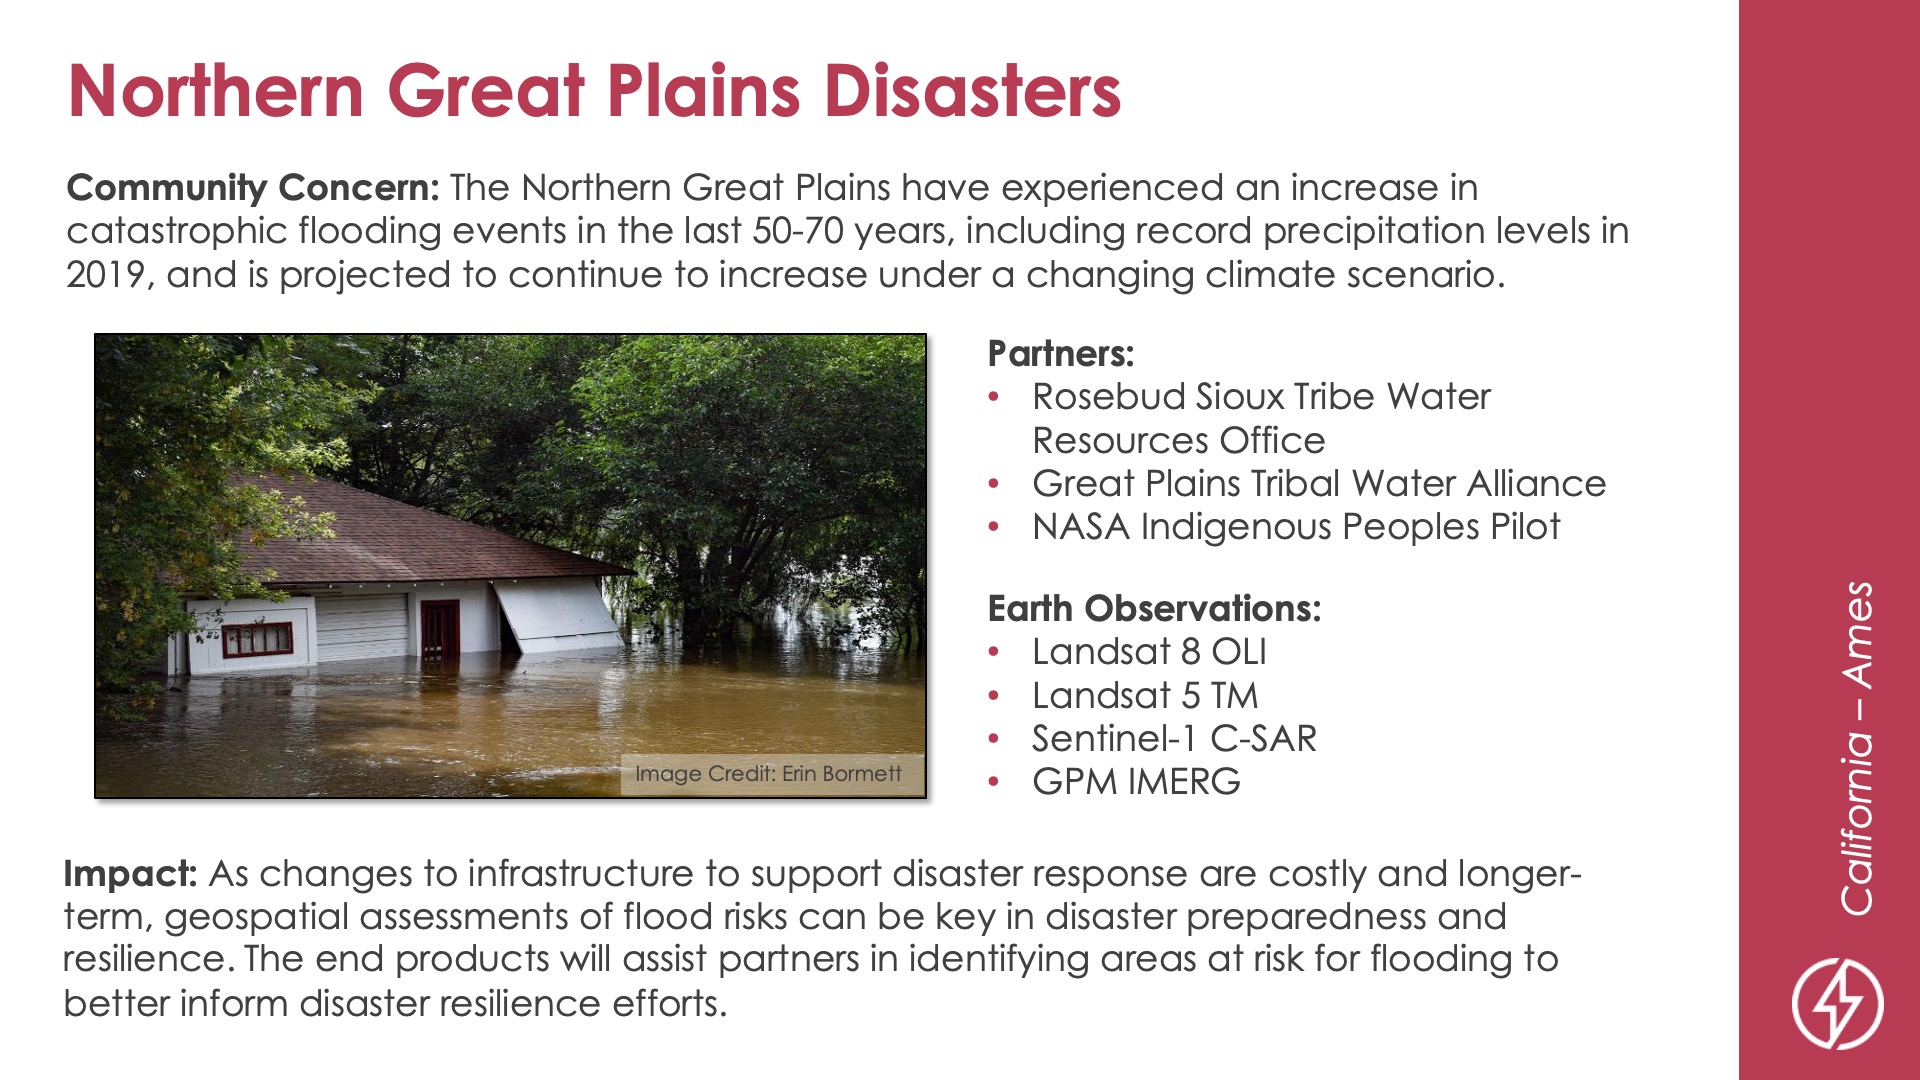 Slide title: Northern Great Plains DisastersDEVELOP Node: California - AmesCommunity Concern: The Northern Great Plains have experienced an increase in catastrophic flooding events in the last 50-70 years, including record precipitation levels in 2019, and is projected to continue to increase under a changing climate scenario.Impact: As changes to infrastructure to support disaster response are costly and longer-term, geospatial assessments of flood risks can be key in disaster preparedness and resilience. The end products will assist partners in identifying areas at risk for flooding to better inform disaster resilience efforts.Partners: Rosebud Sioux Tribe Water Resources Office, Great Plains Tribal Water Alliance, NASA Indigenous Peoples PilotEarth Observations: Landsat 8 OLI, Landsat 5 TM, Sentinel-1 C-SAR, GPM IMERG